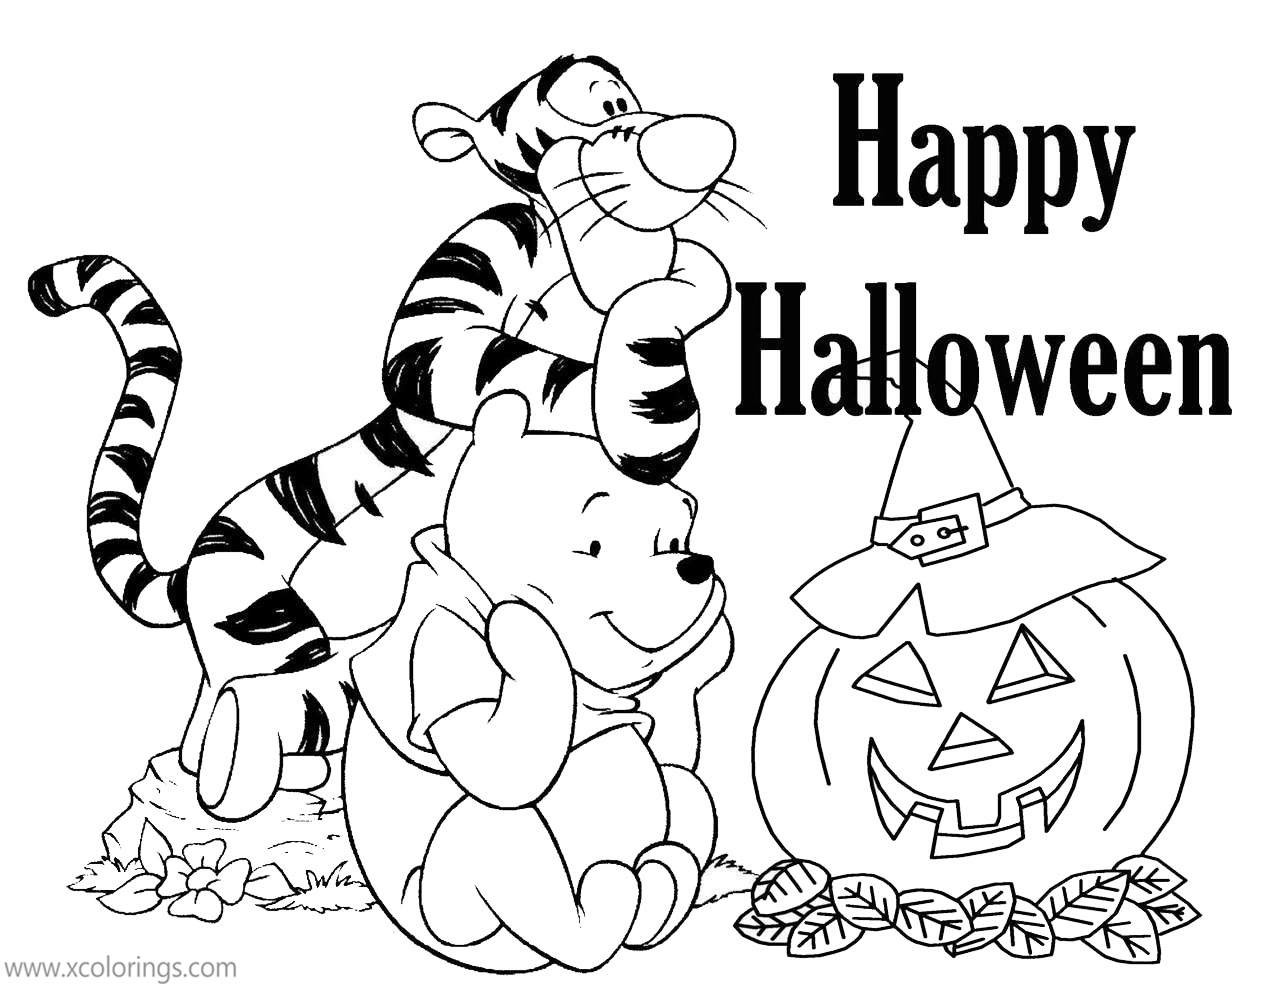 Free Winnie the Pooh Halloween Coloring Pages Happy Halloween printable